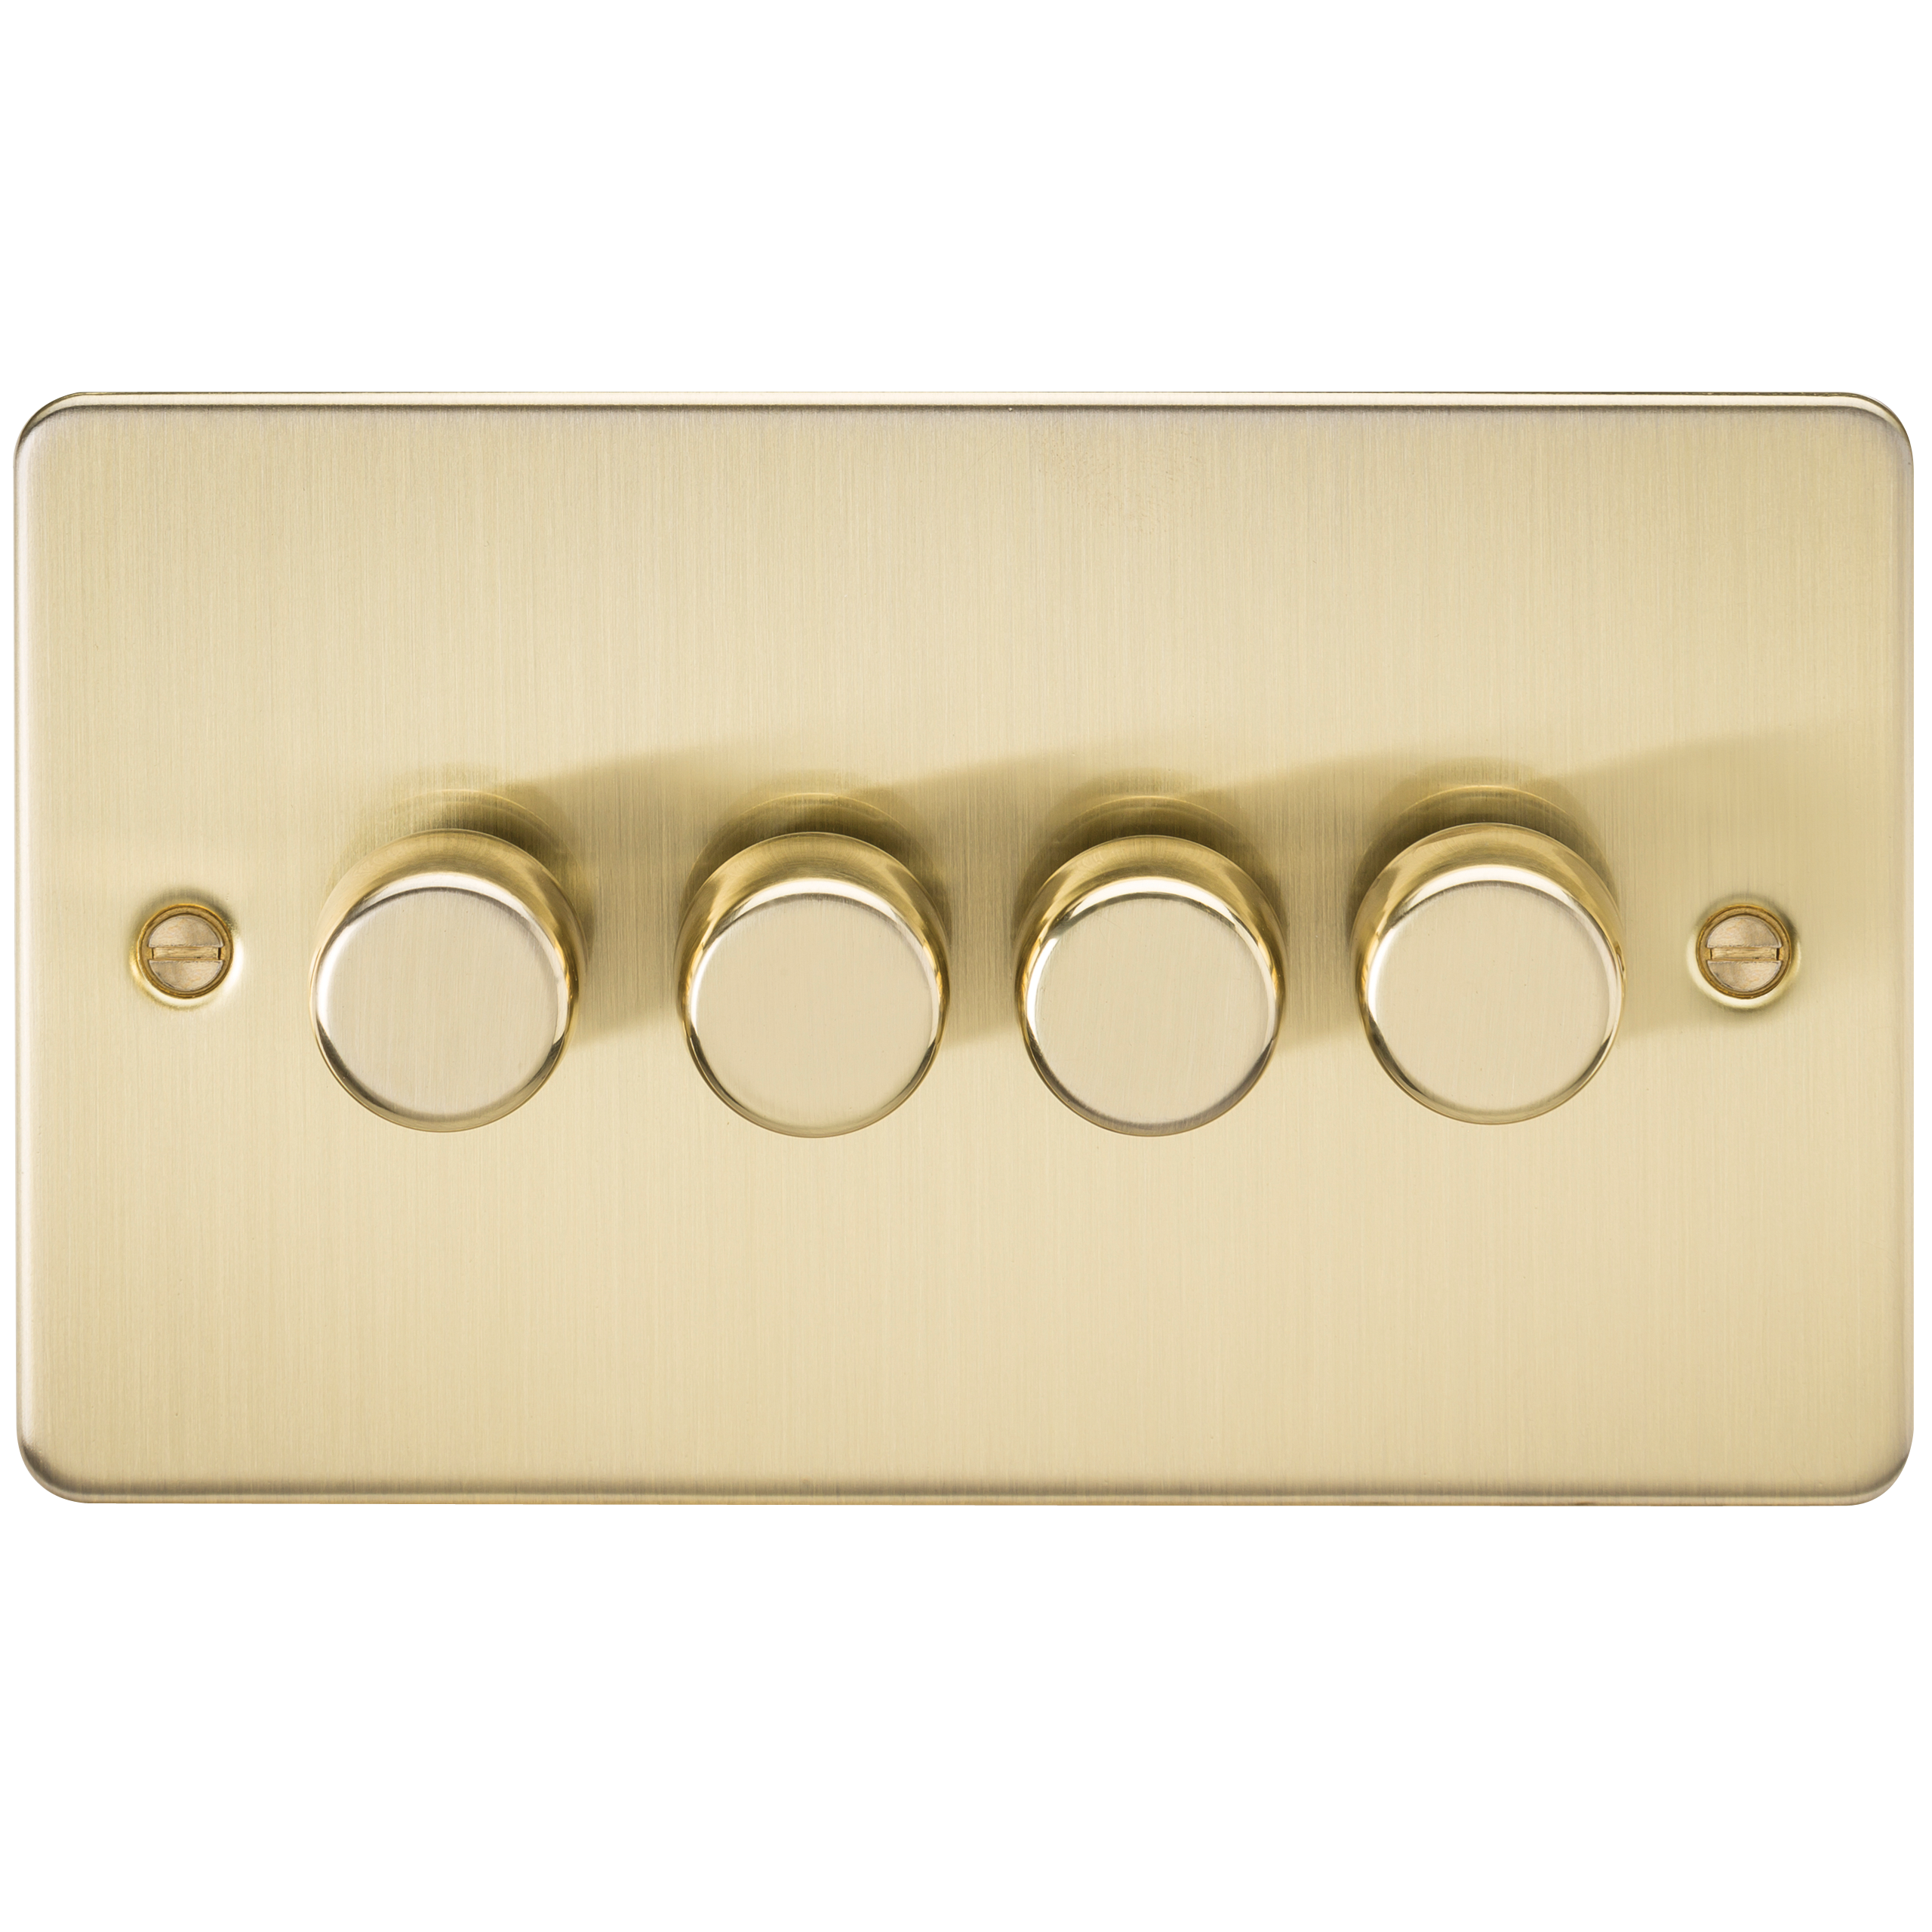 FLAT PLATE 4G 2 WAY 40-400W DIMMER - BRUSHED BRASS - FP2174BB 